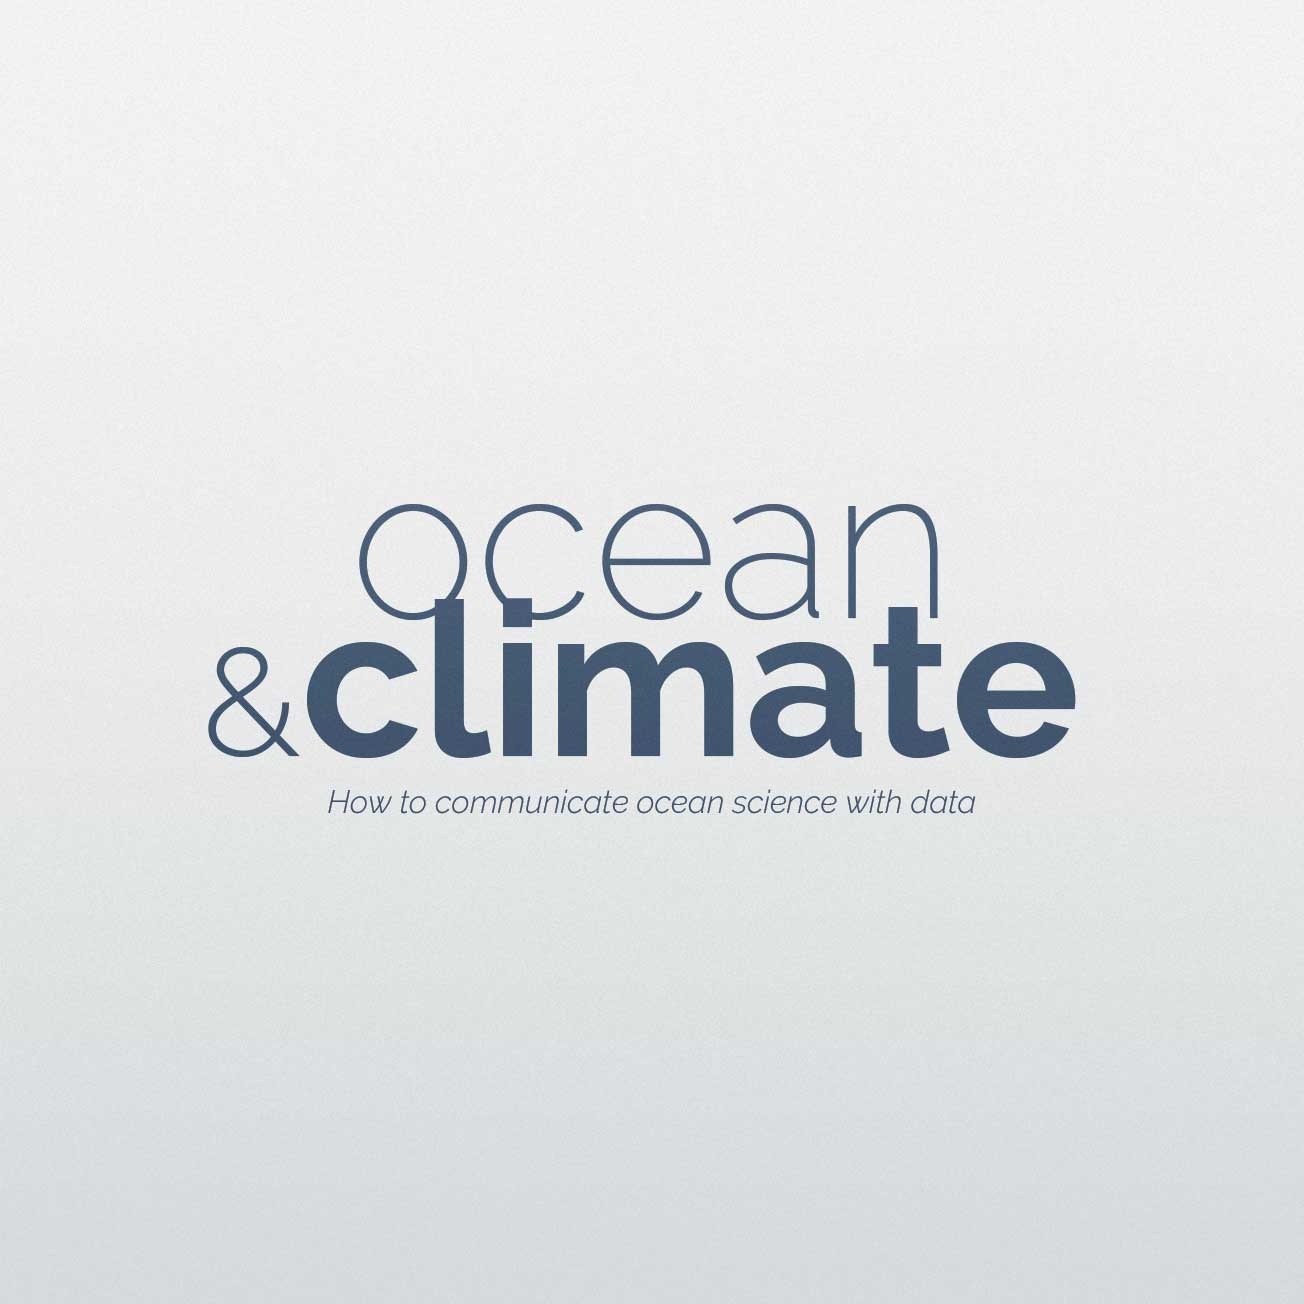 Ocean & Climate report The Visual Agency